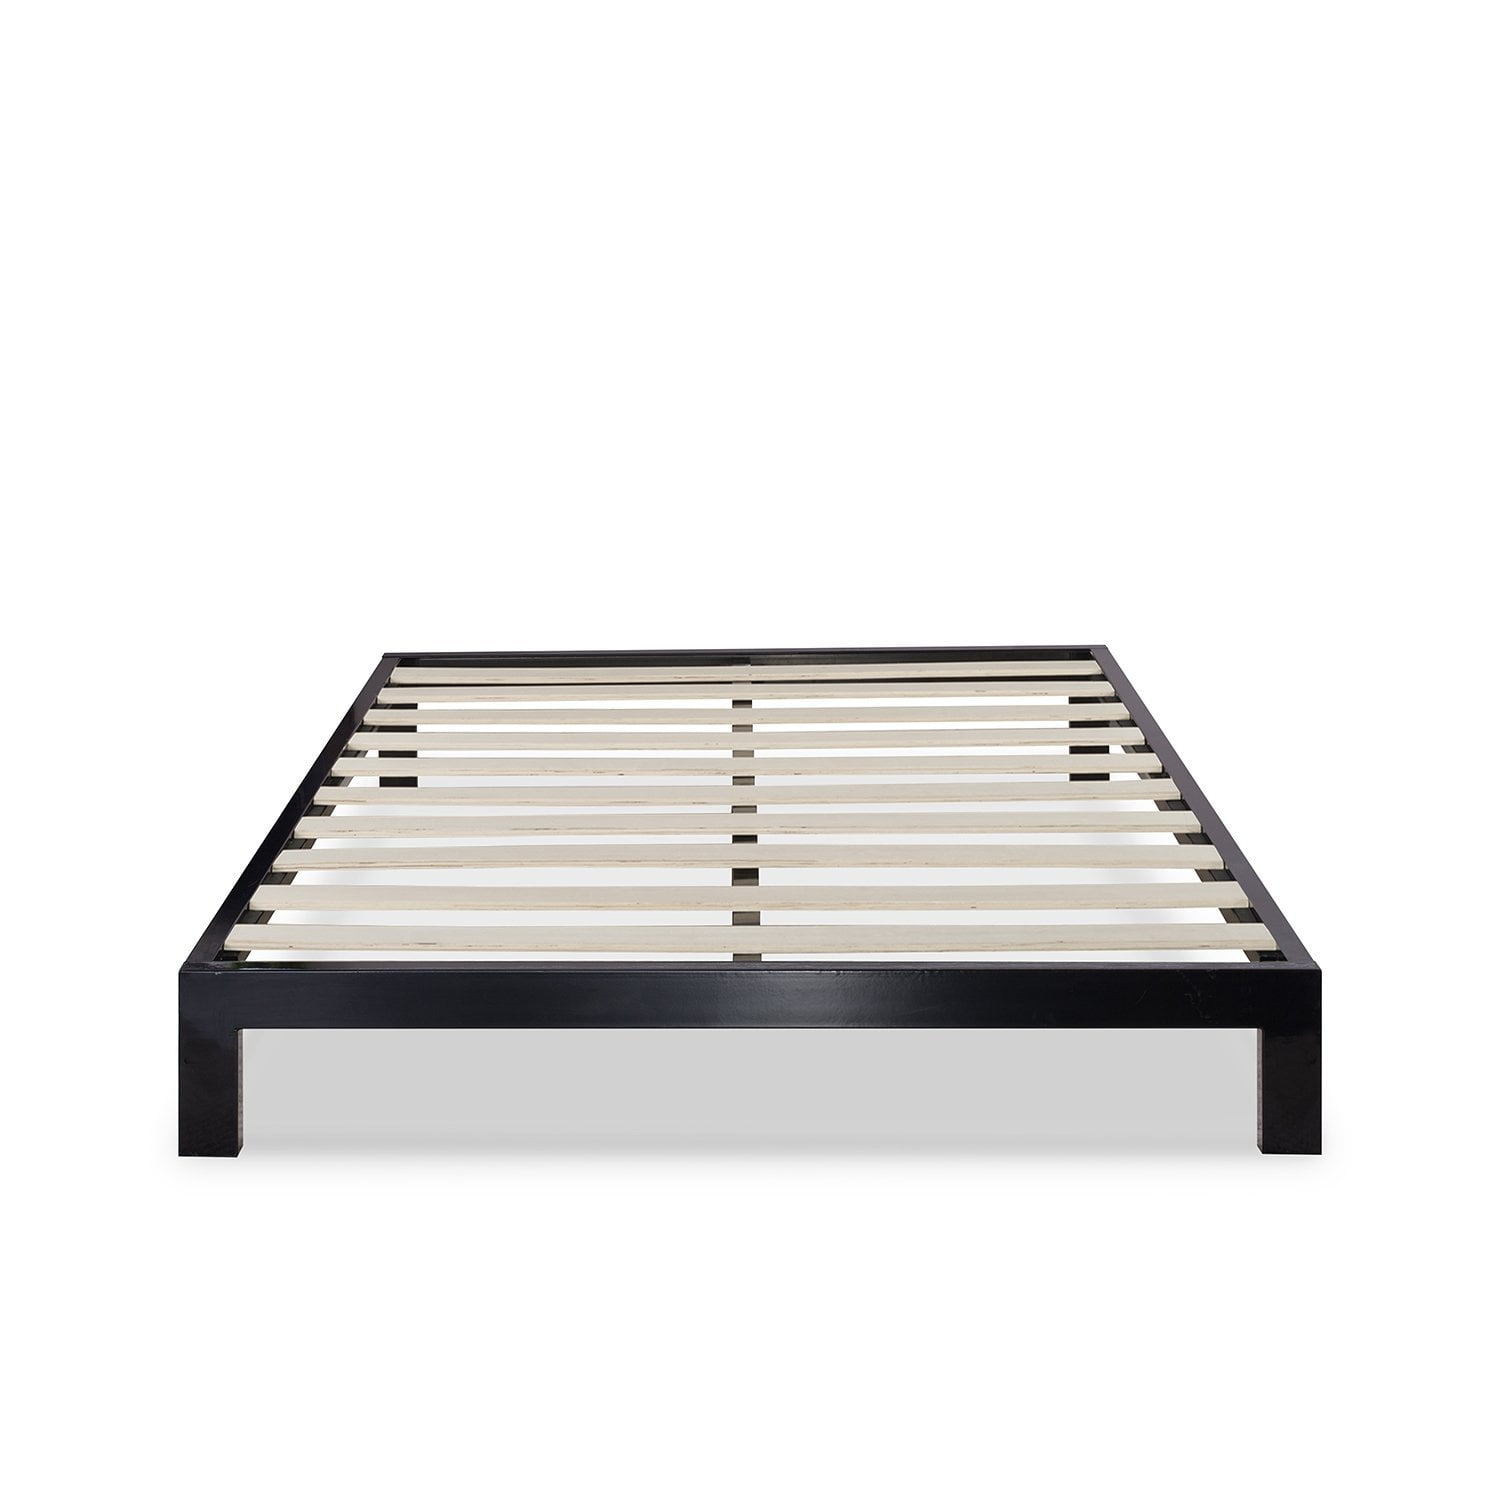 Modern Studio Platform 2000 Metal Bed, What S The Strongest Bed Frame Type